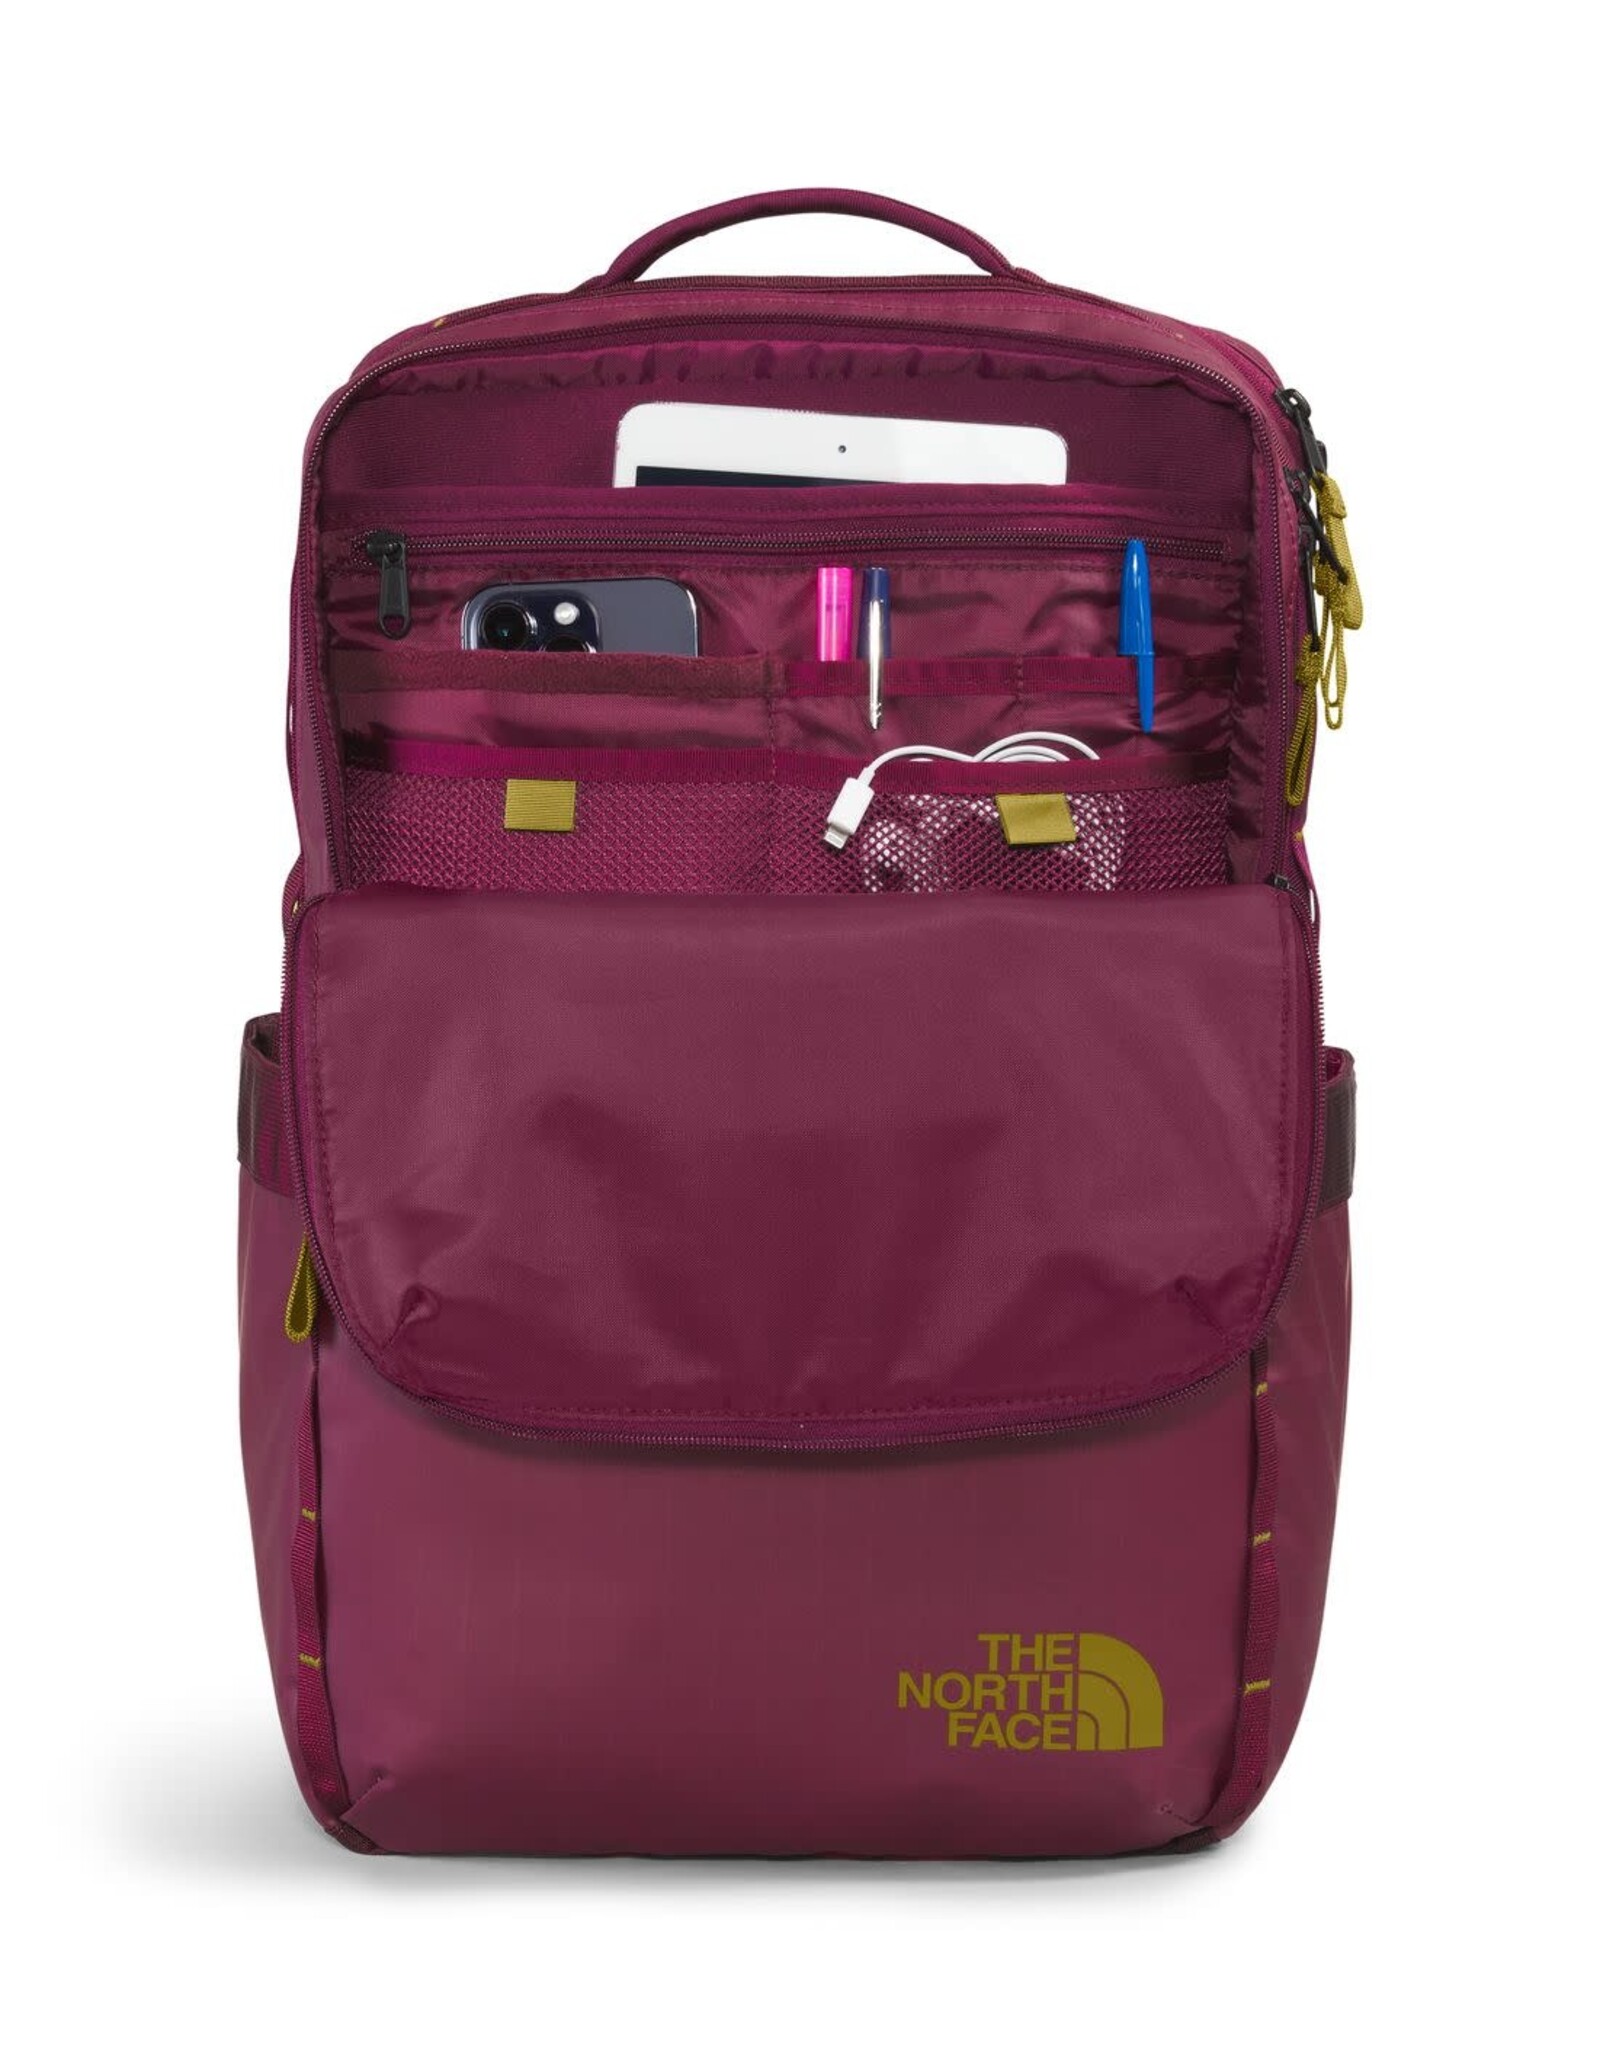 THE NORTH FACE BASE CAMP VOYAGER DAYPACK